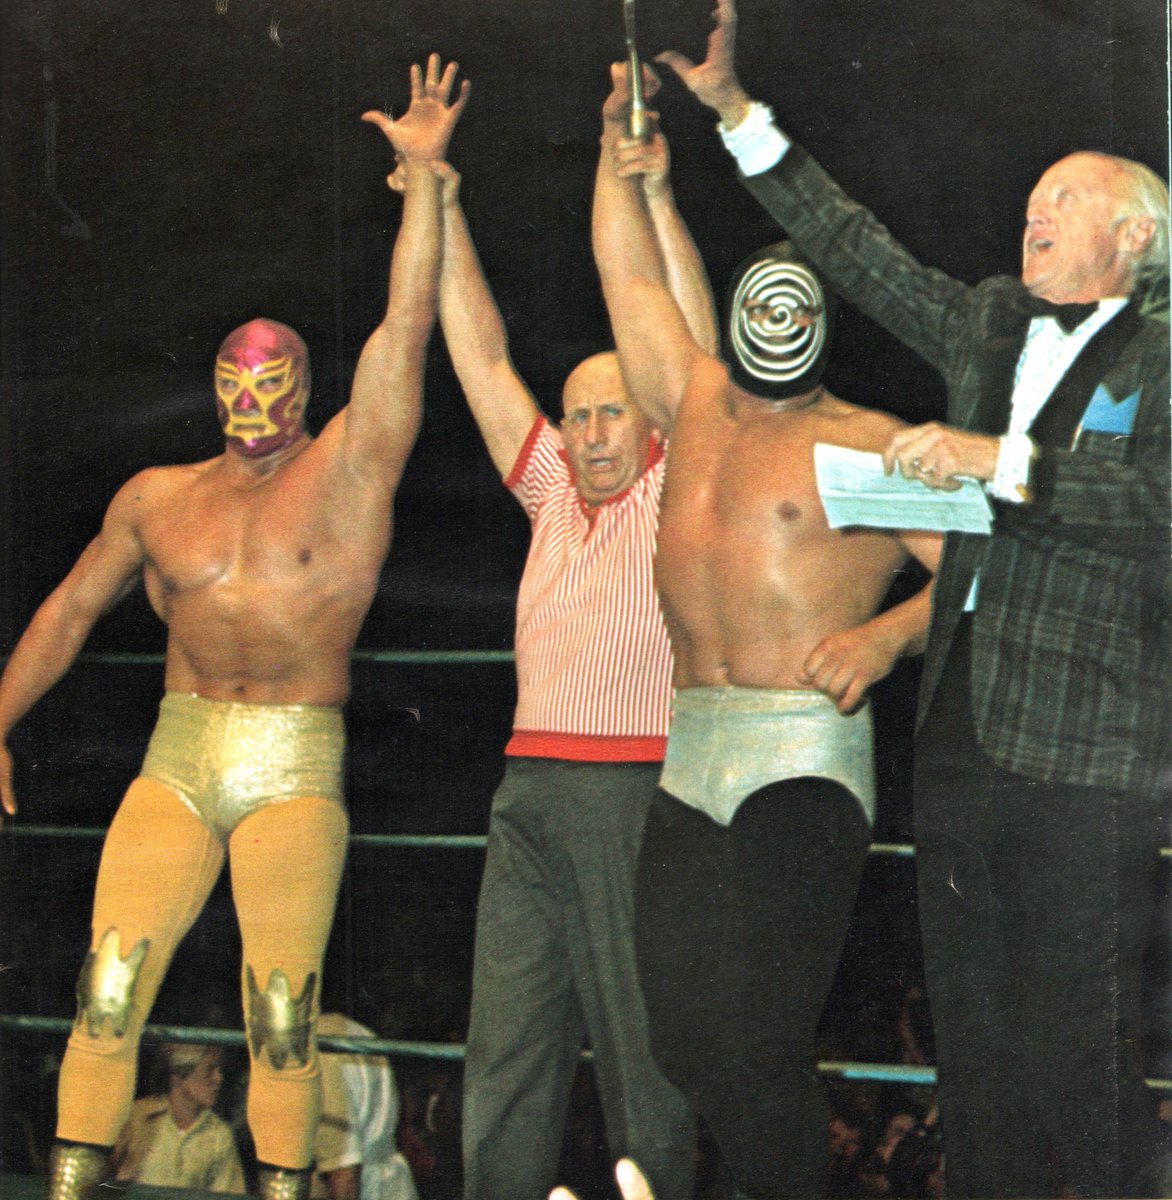 A great photo after a win by the Mascaras Brothers, Mil Mascaras and El Sicodelico, at the @olympicaud . It does not give the date on this photo anywhere, but they did team often, this could be from 1970 after they defeated Great Goliath and Ron Starr. The announcer is Jimmy…